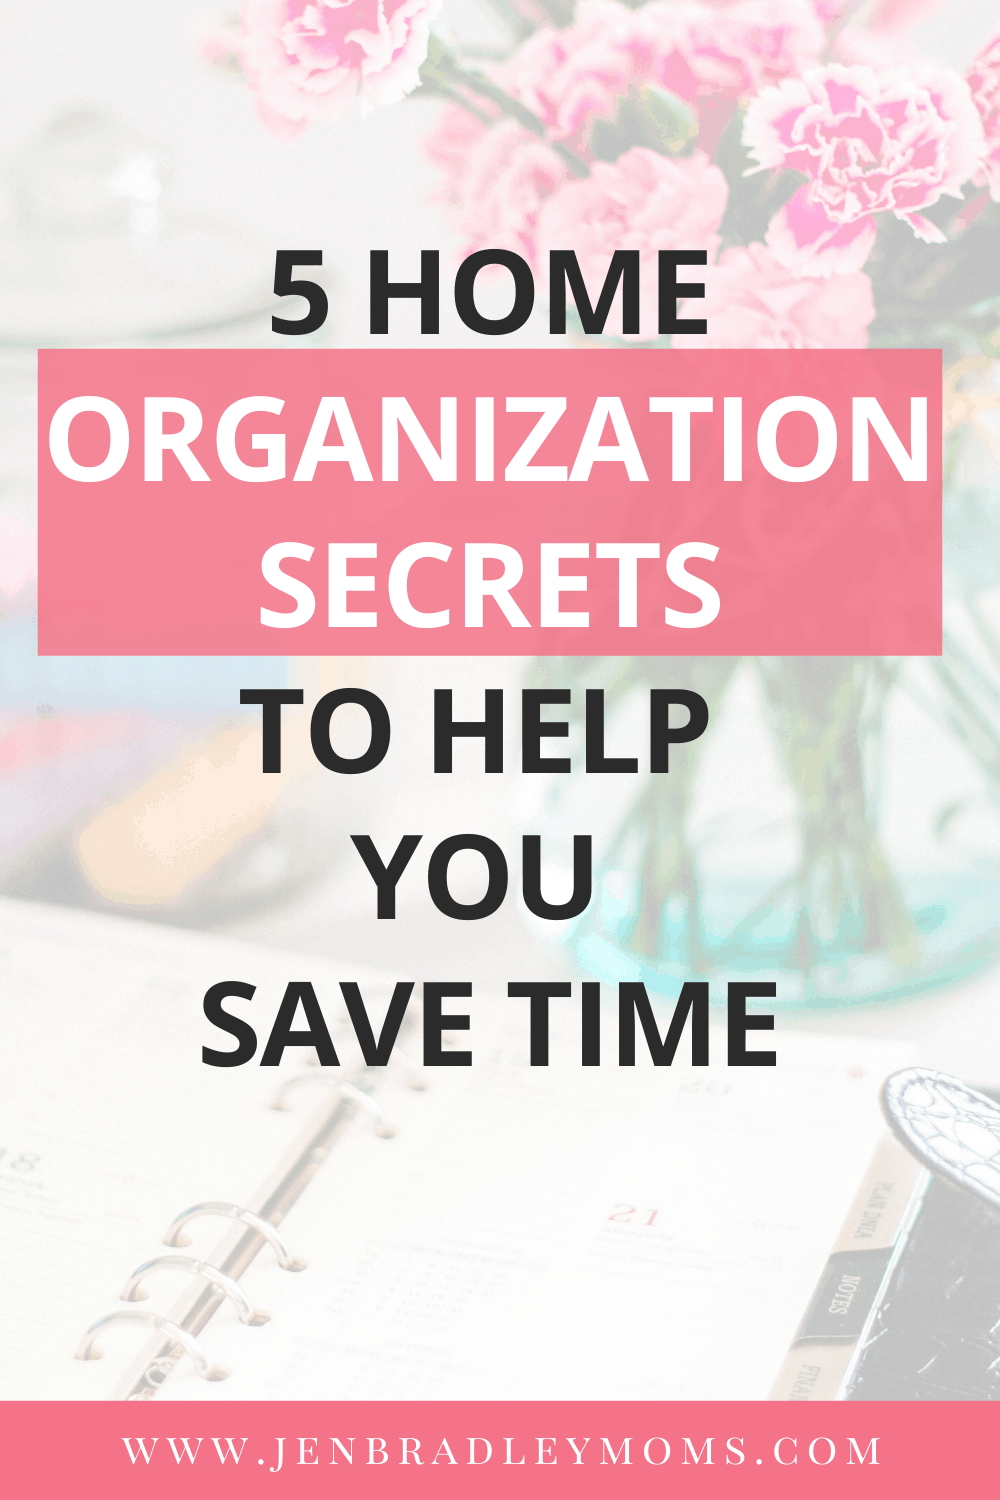 5 Home Organization Secrets to Save Time Everyday